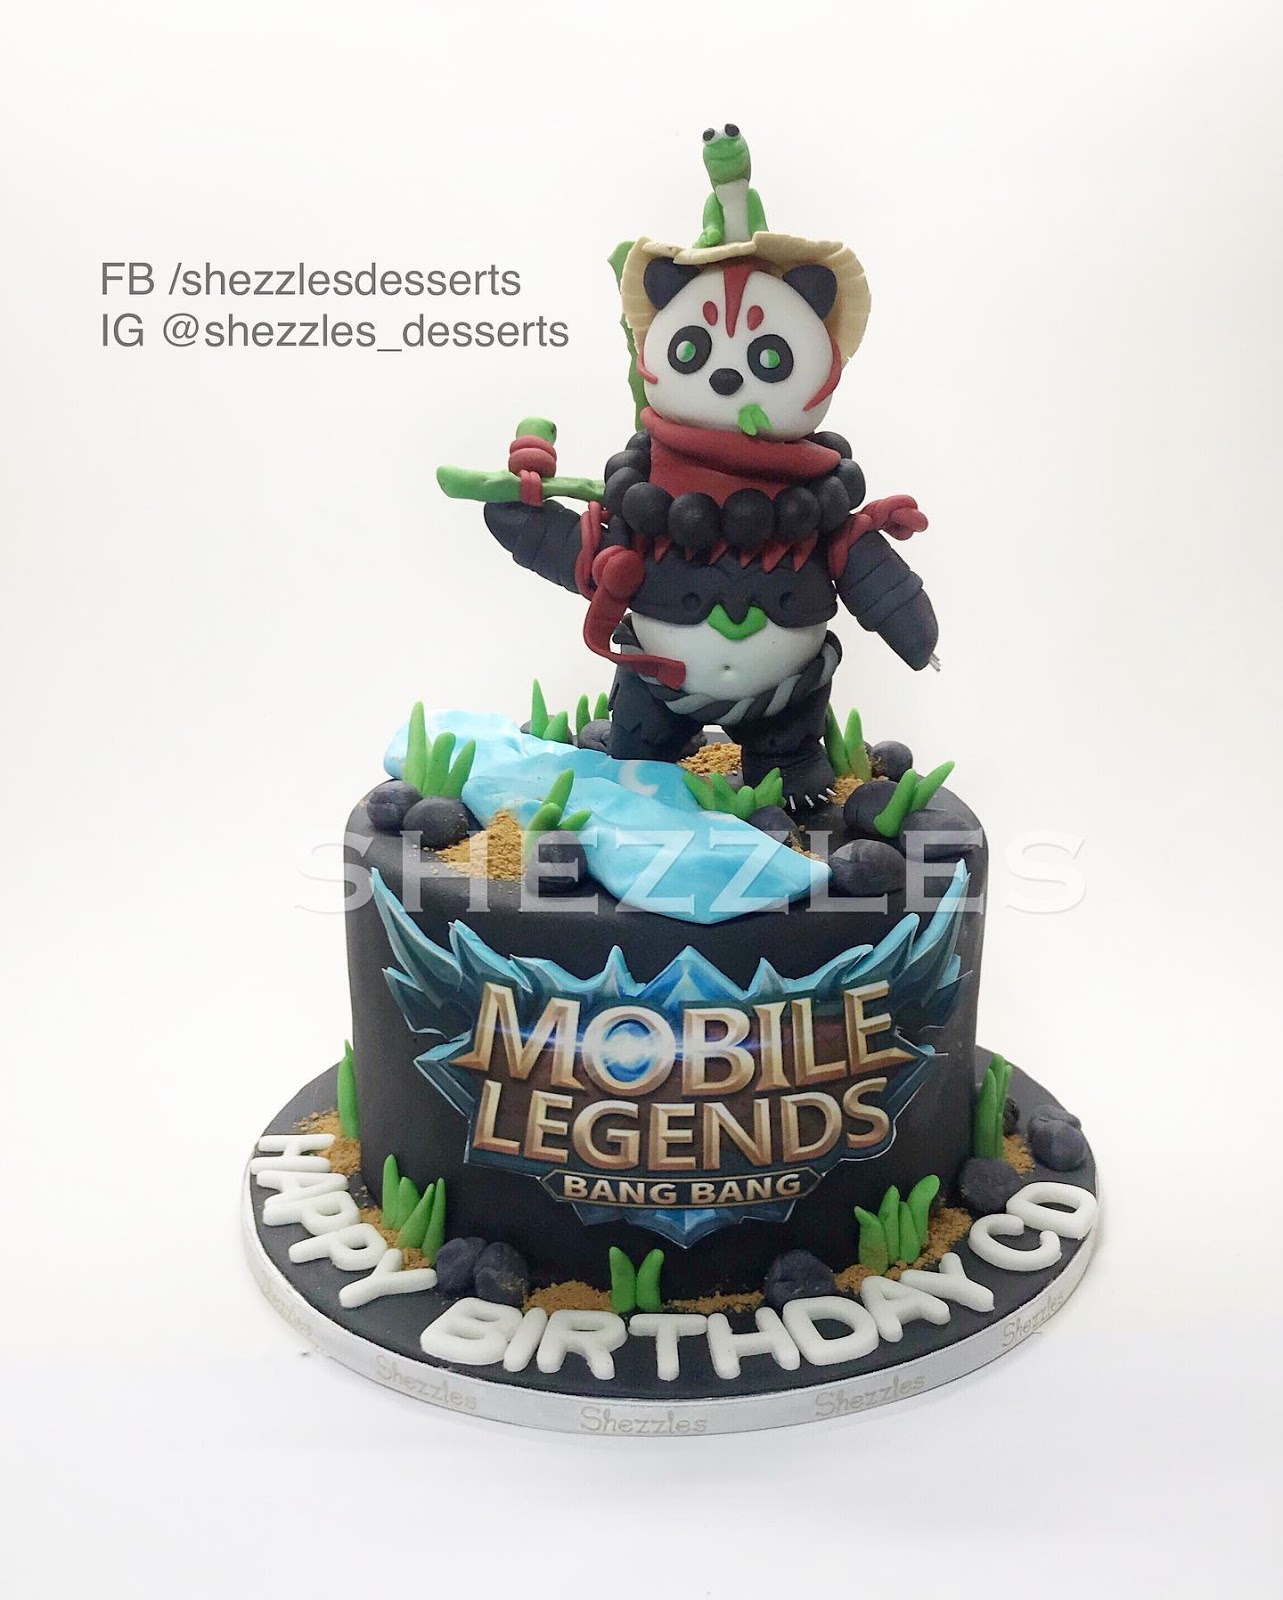 SHEZZLES Cakes  and Pastries Mobile  Legends  Bang Bang 